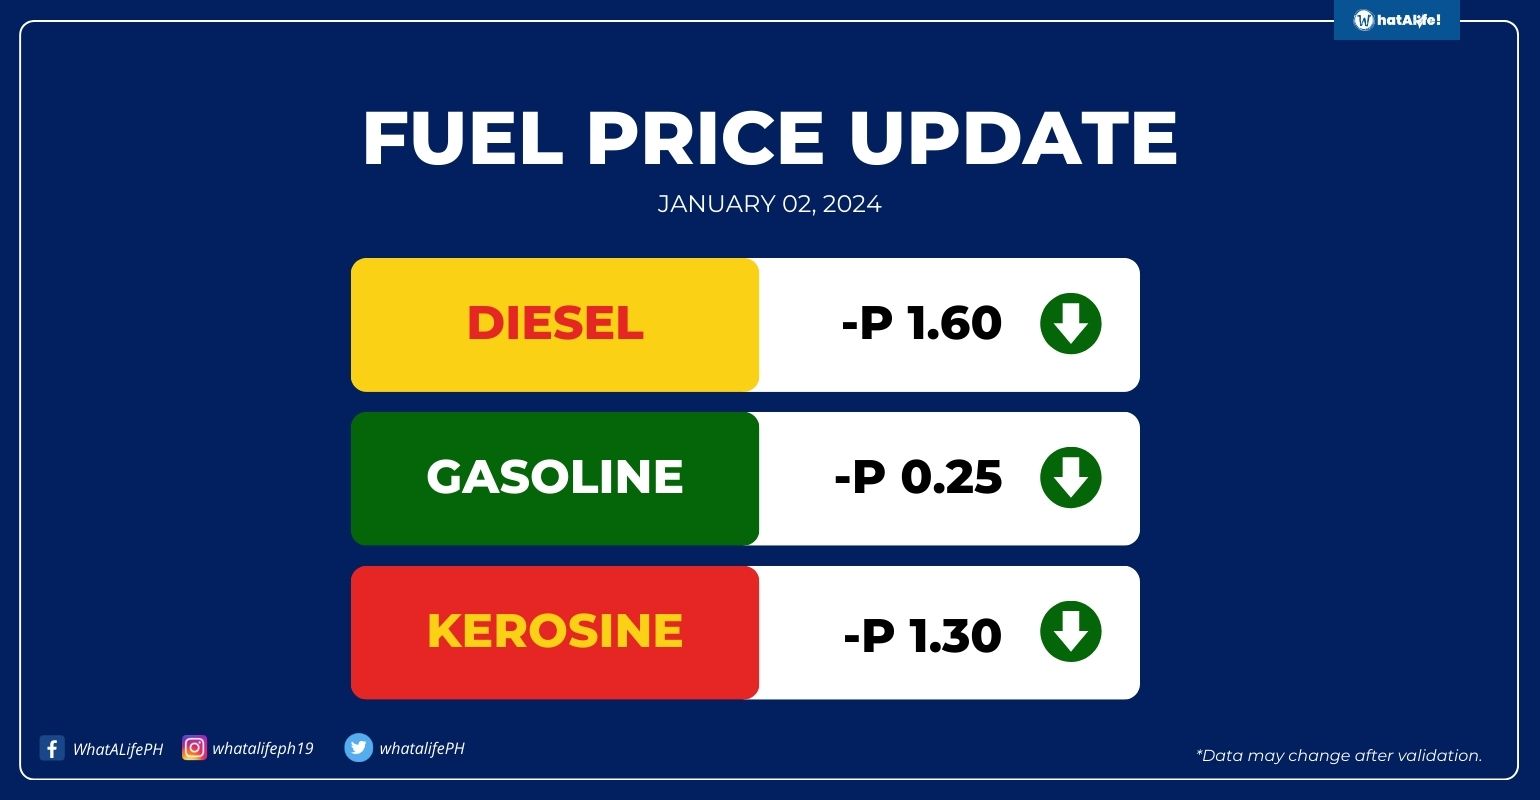 fuel price rollback effective january 02 2024